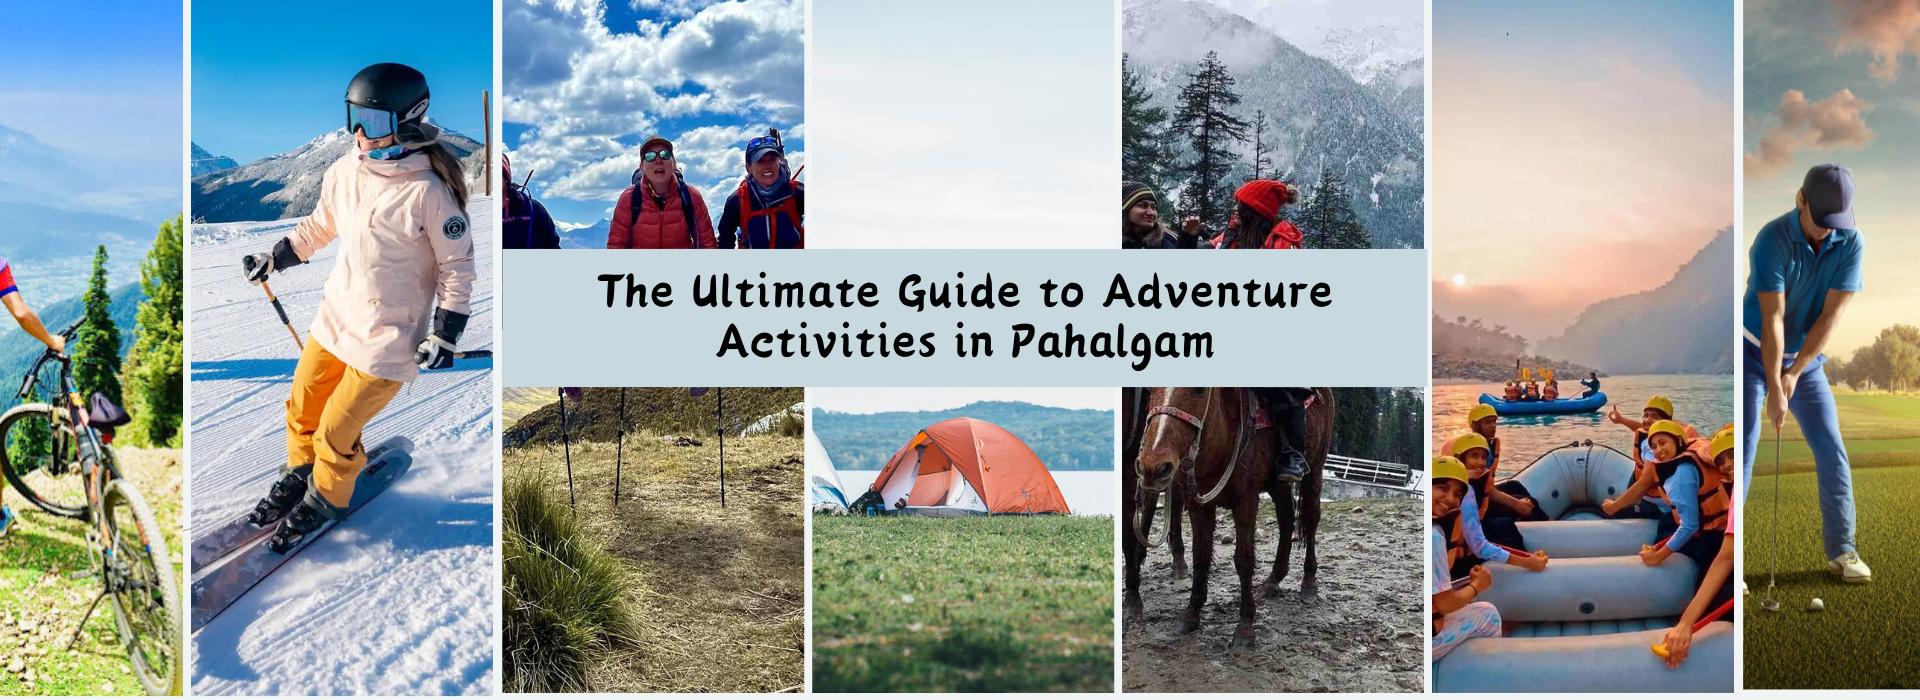 The Ultimate Guide to Adventure Activities in Pahalgam